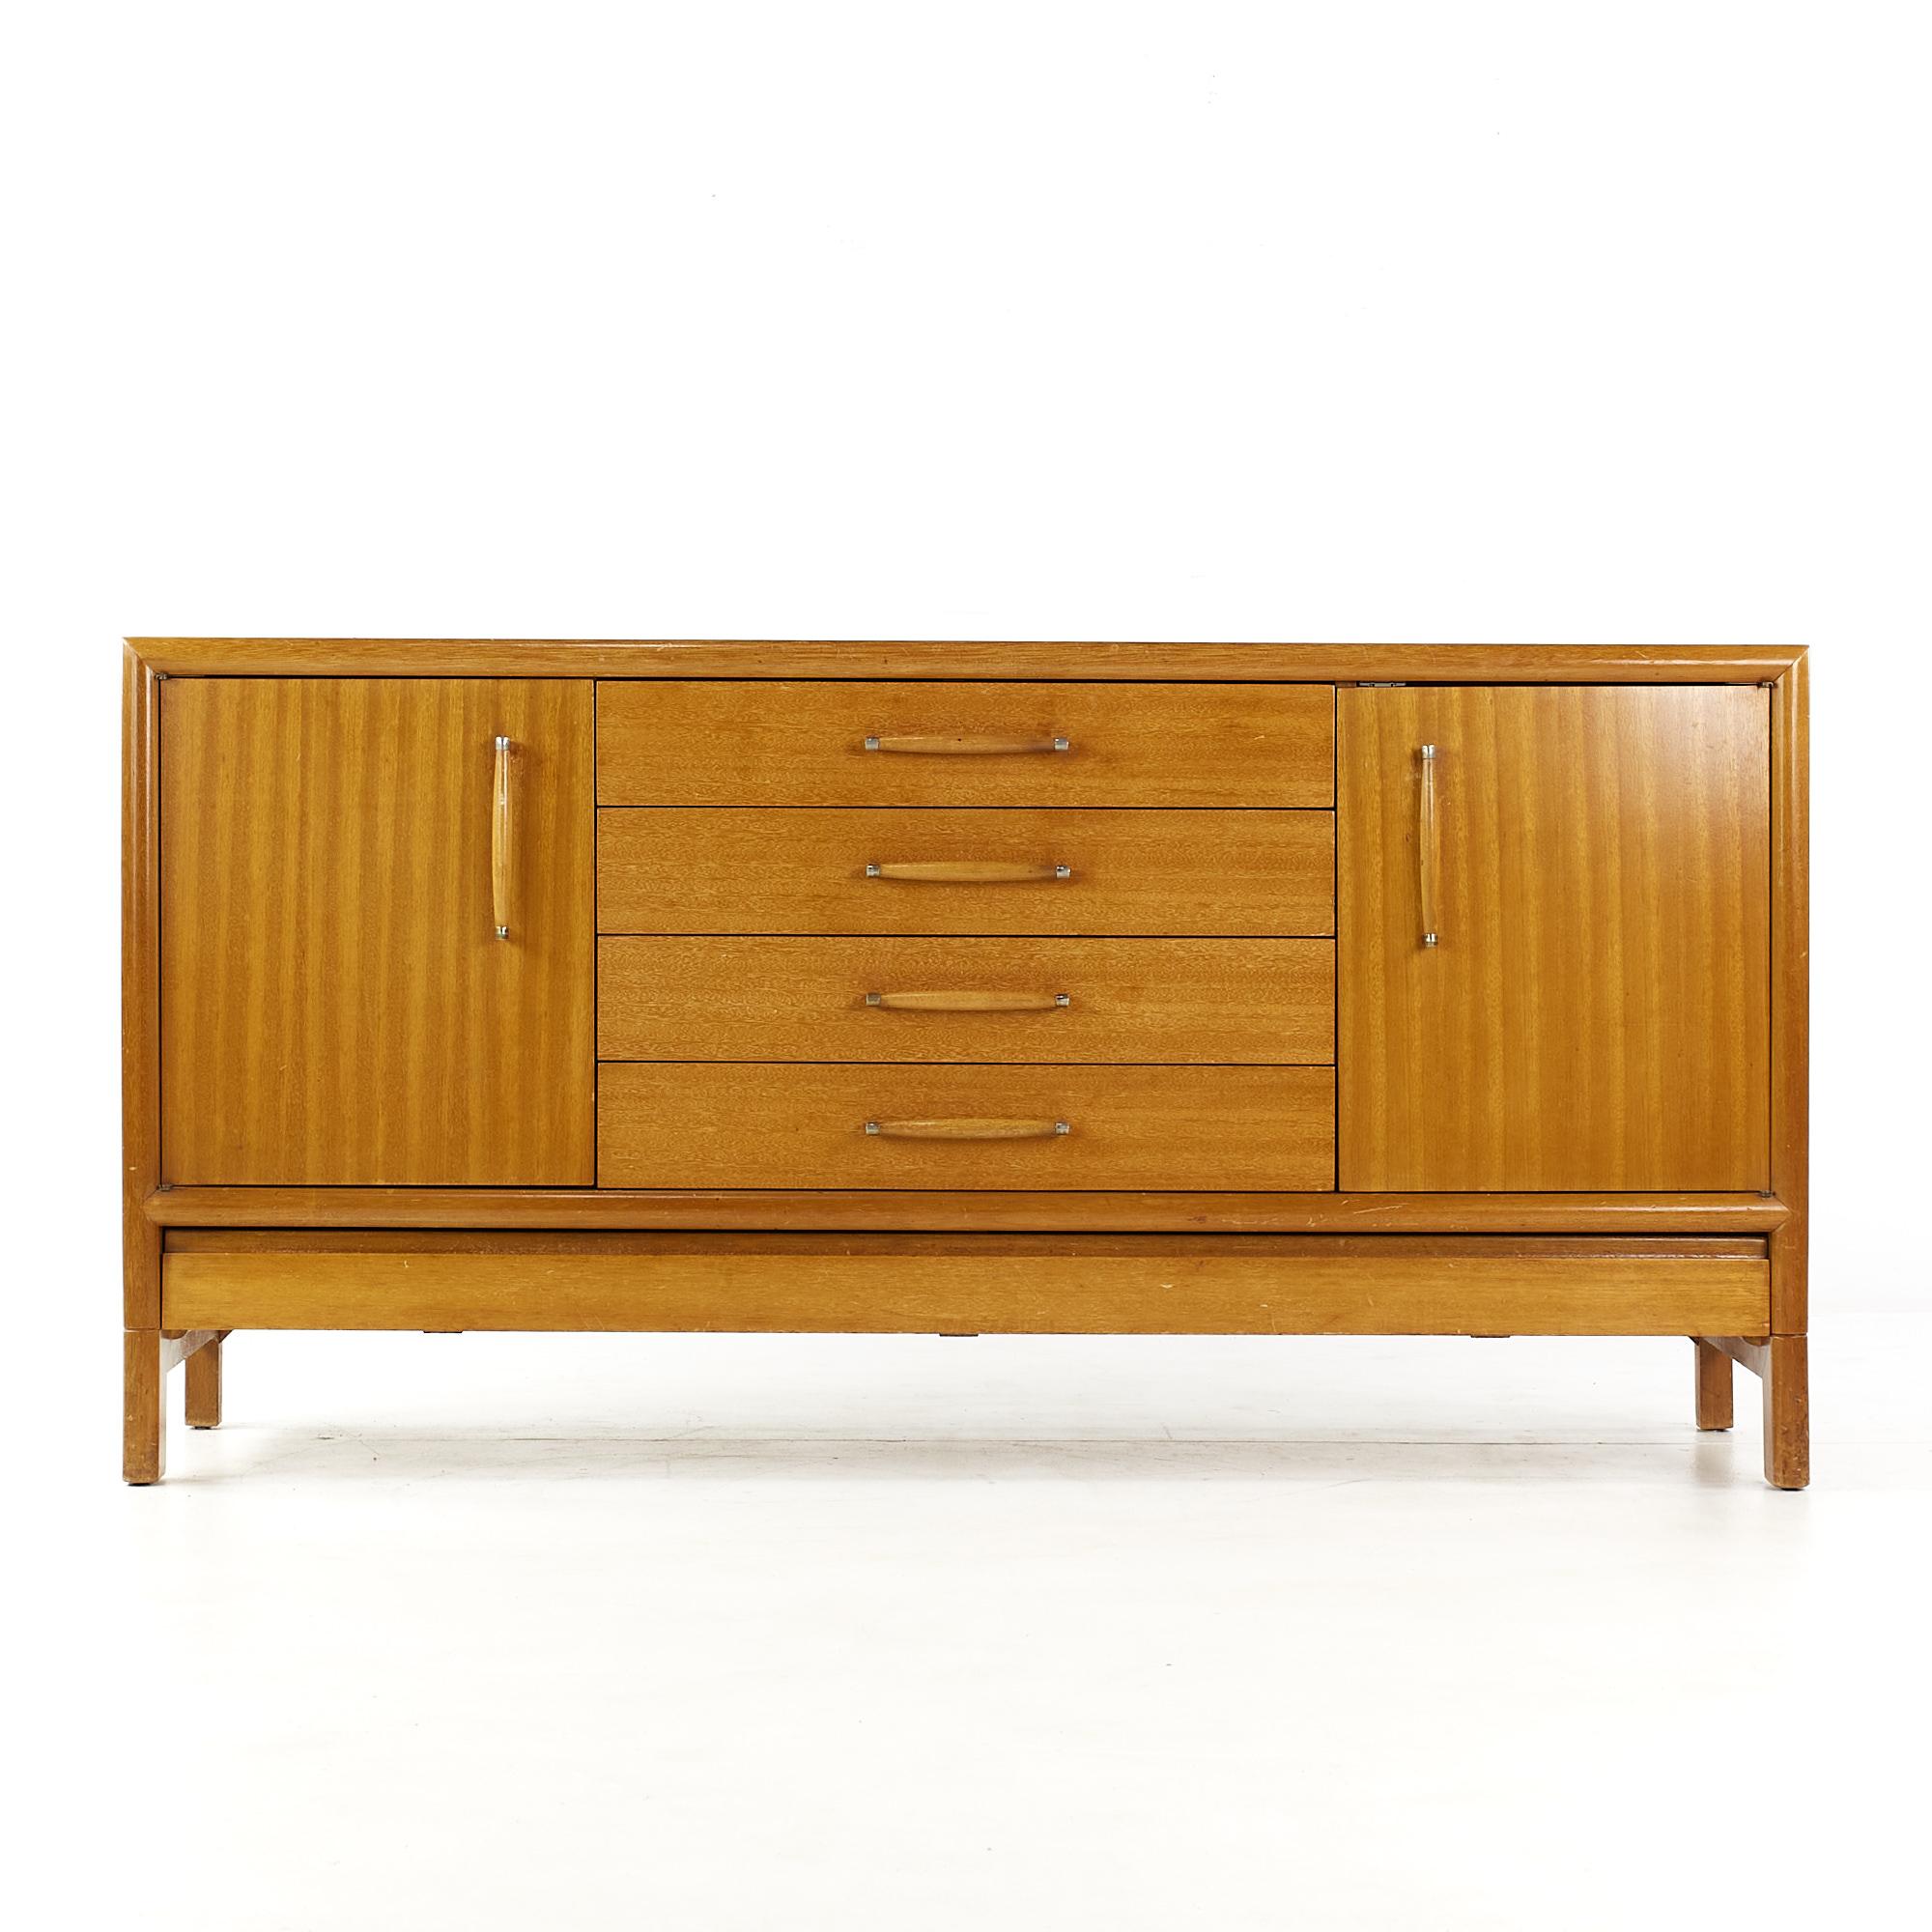 John Keal for Brown Saltman Mid Century Bleached Mahogany Credenza

This credenza measures: 66 wide x 20 deep x 33 inches high

All pieces of furniture can be had in what we call restored vintage condition. That means the piece is restored upon